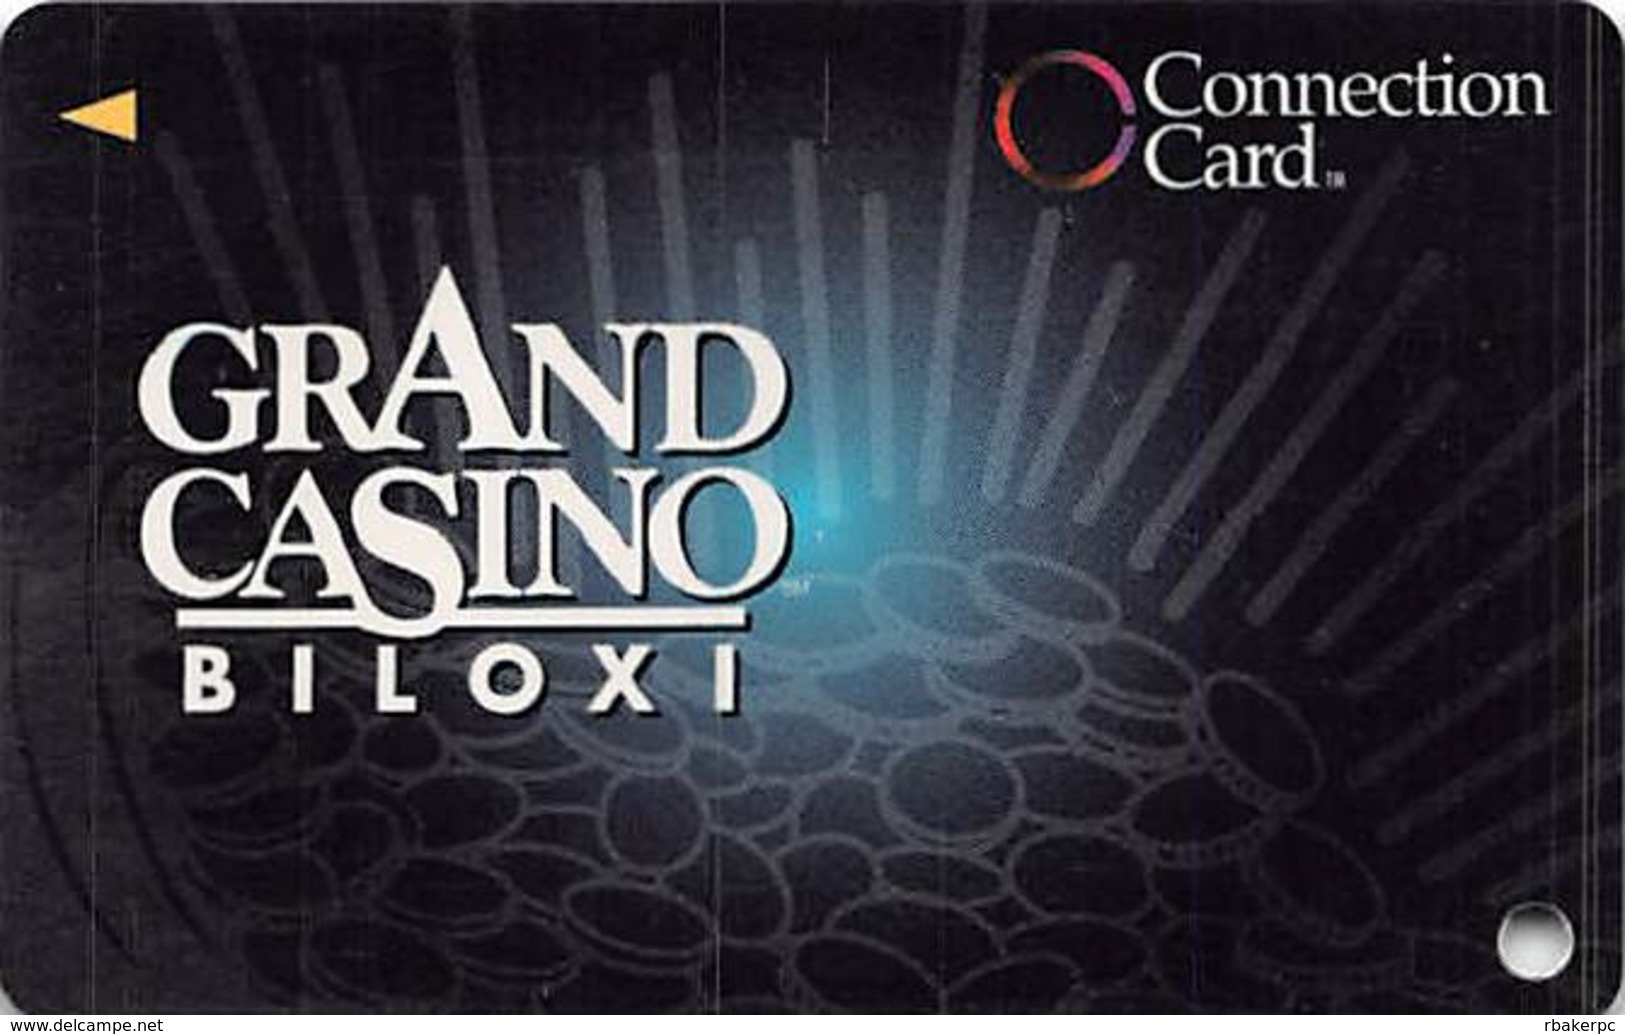 Grand Casino Biloxi MS - BLANK Slot Card - Connection Card With Cpi 2011575 Over Mag Stripe - Casino Cards